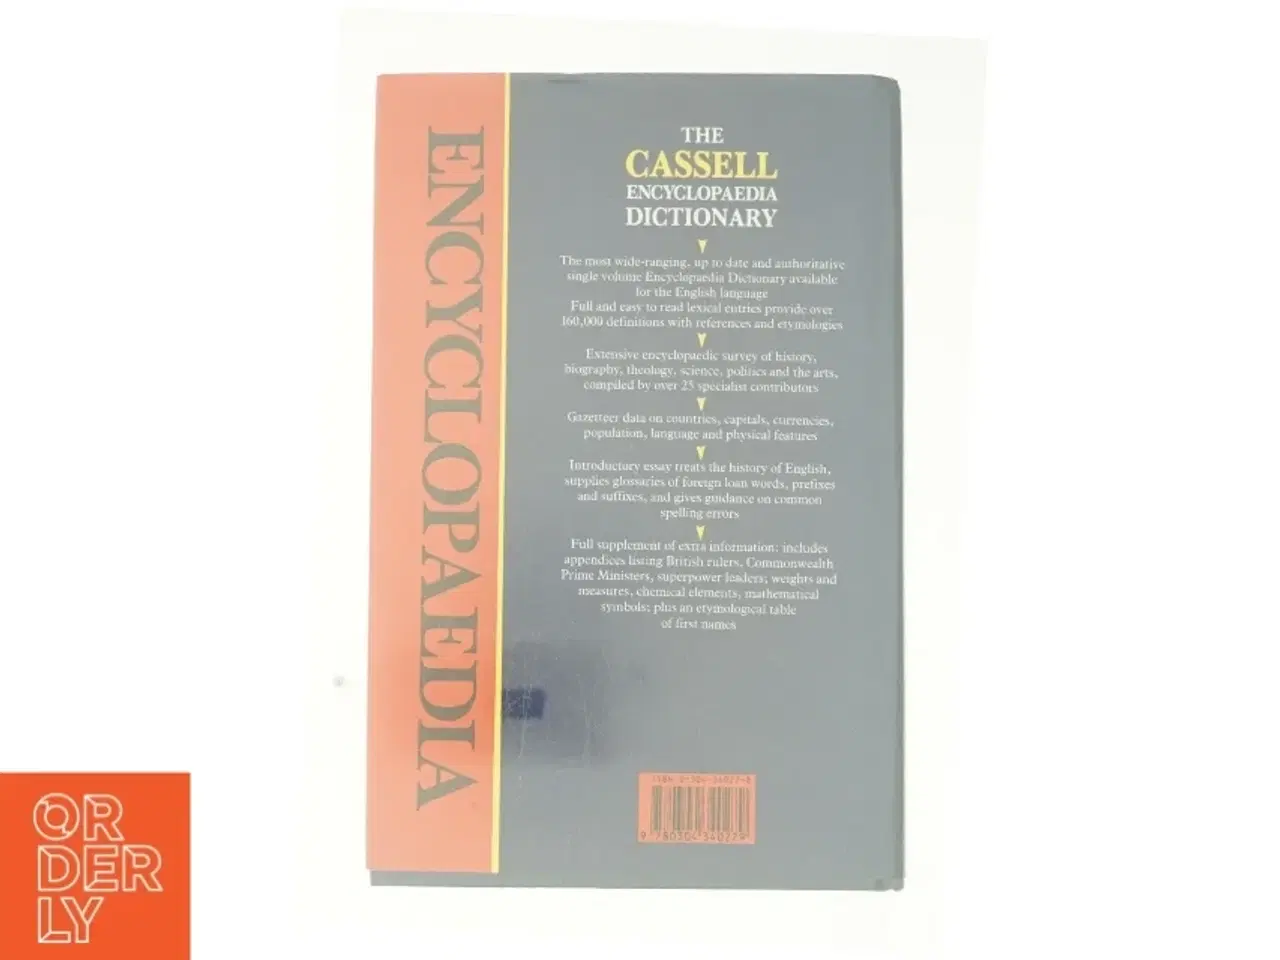 Billede 3 - The Cassell Encyclopaedia Dictionary (reference) (Bog)